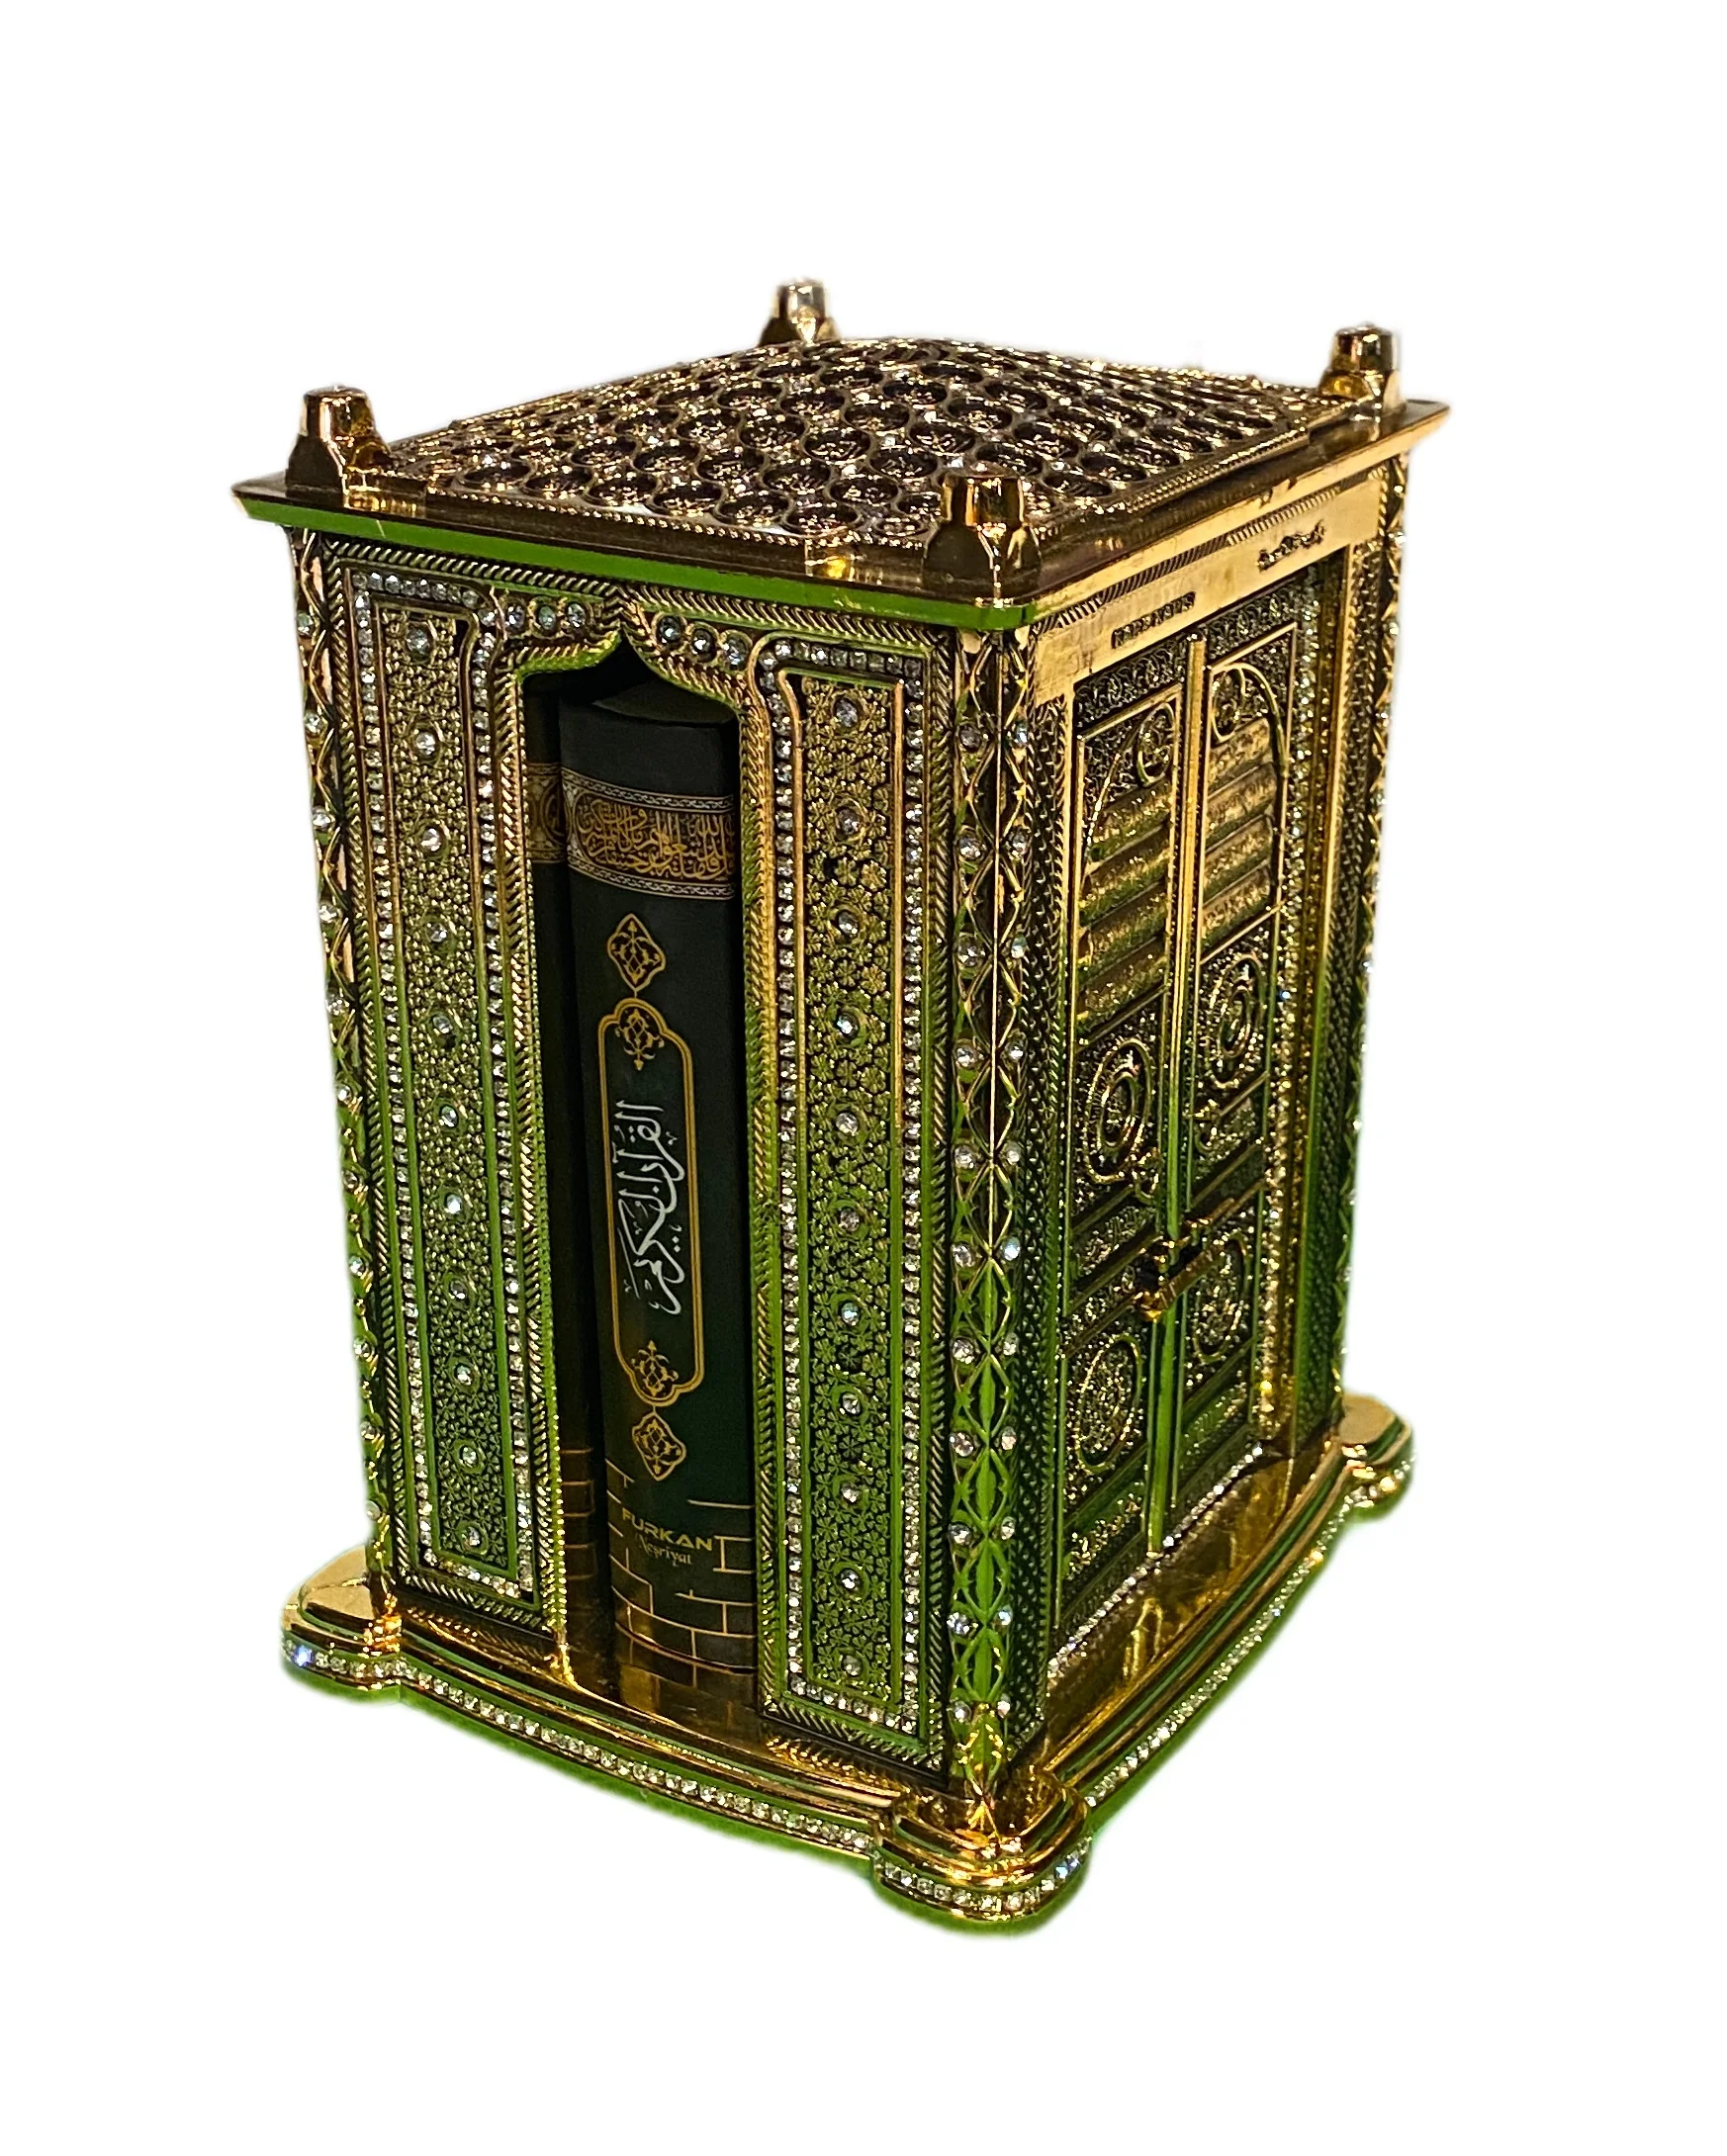 Luxury Quran Gift Set, Gold Trinket, Kaba Design Quran Gift Set, Trinket Islamic Gift Set, Muslim Items, Muslim Products, Moshaf arabic quran and words learning educational toys 18 chapters education quran tablet learn kuran muslim kids gift